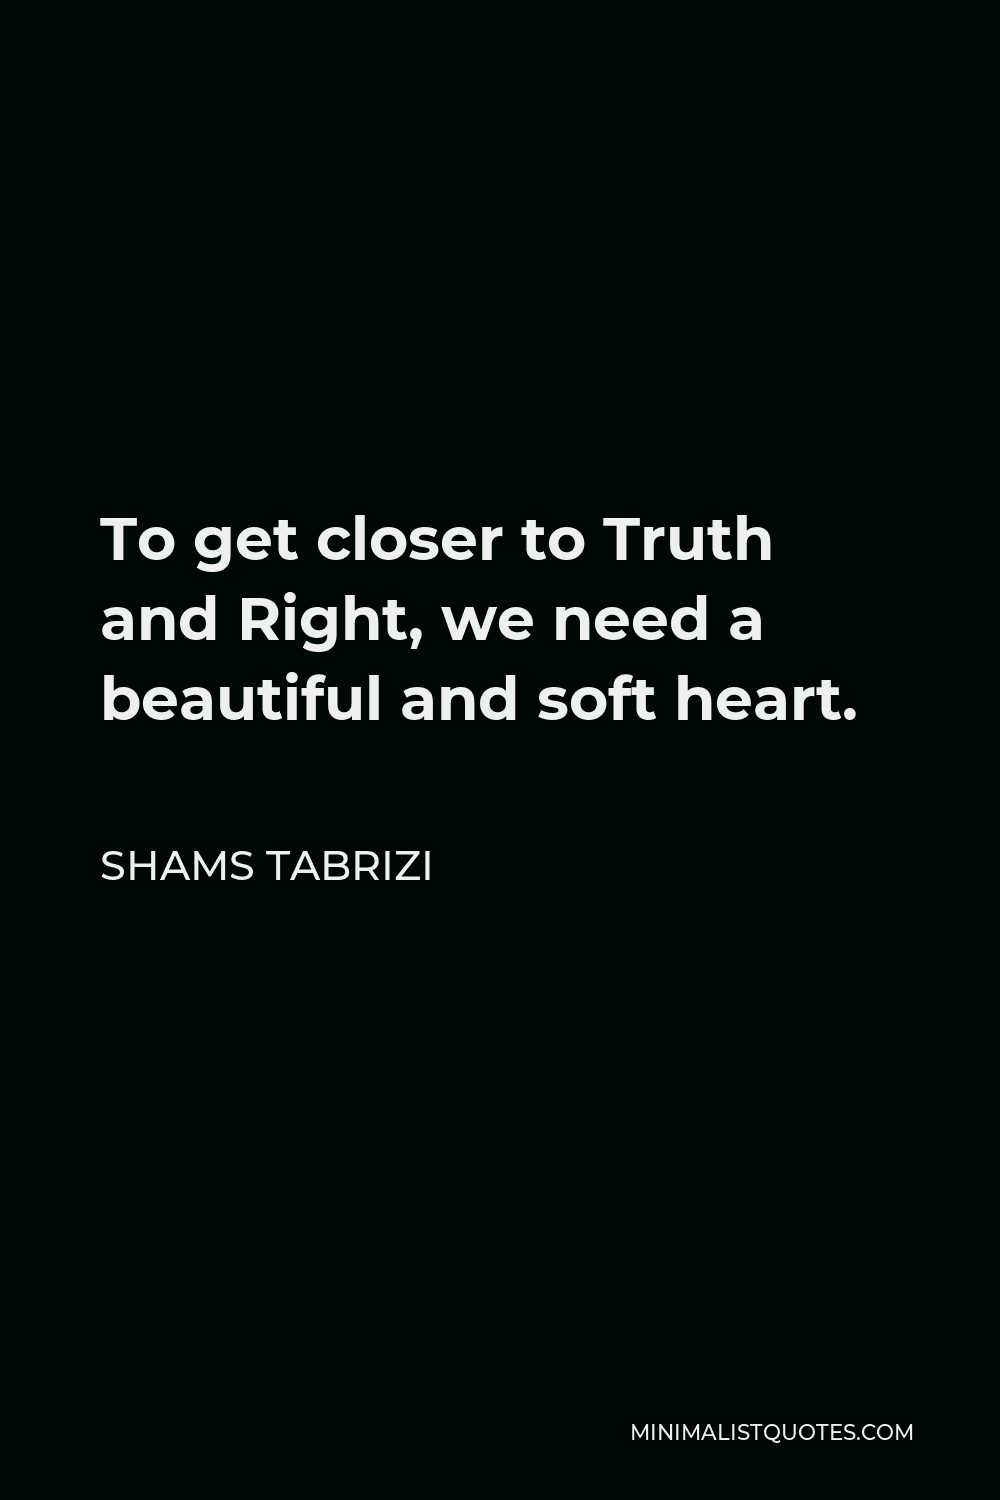 Shams Tabrizi Quote - To get closer to Truth and Right, we need a beautiful and soft heart.